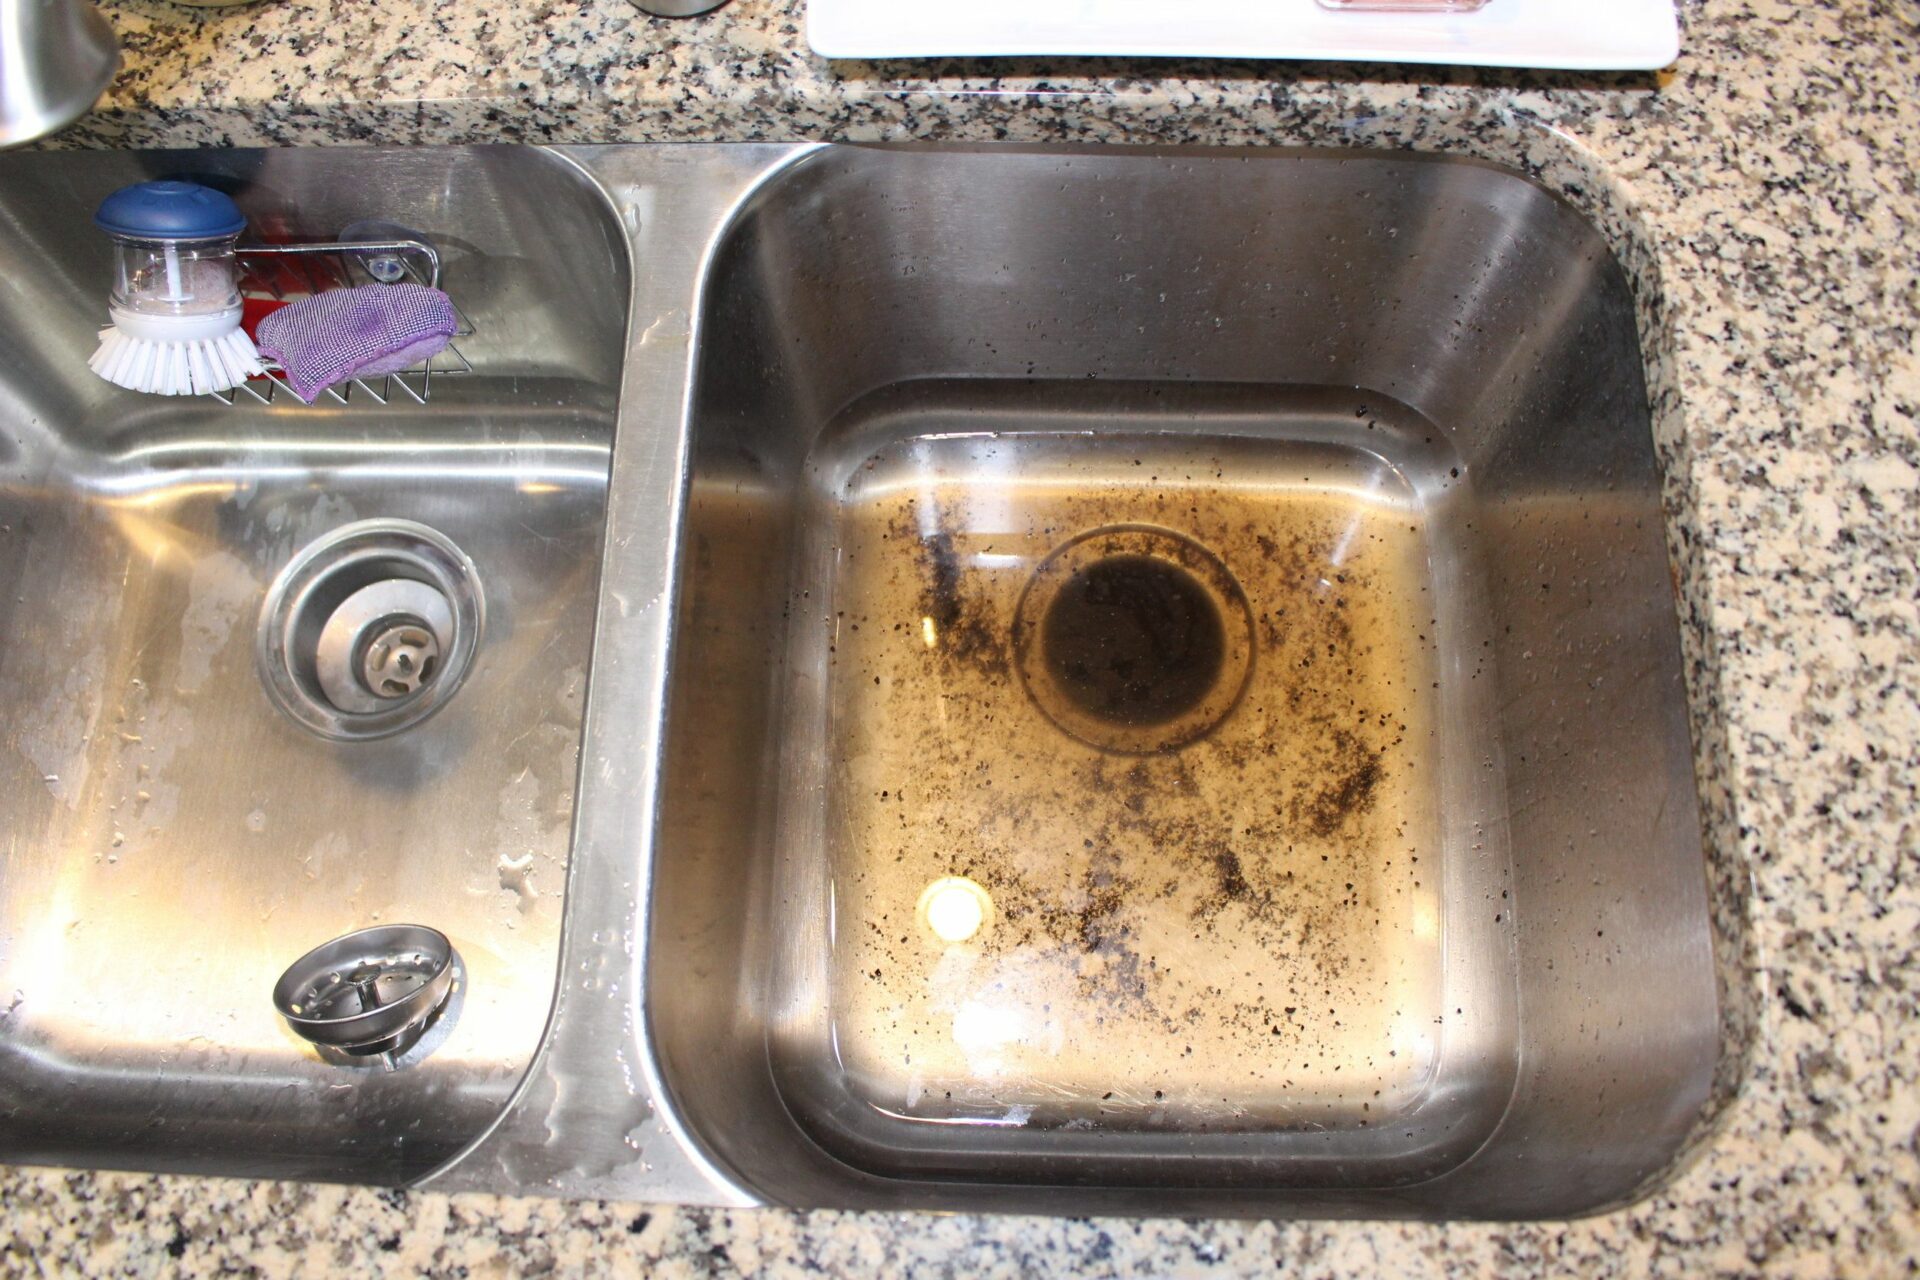 What Causes a Clogged Garbage Disposal?